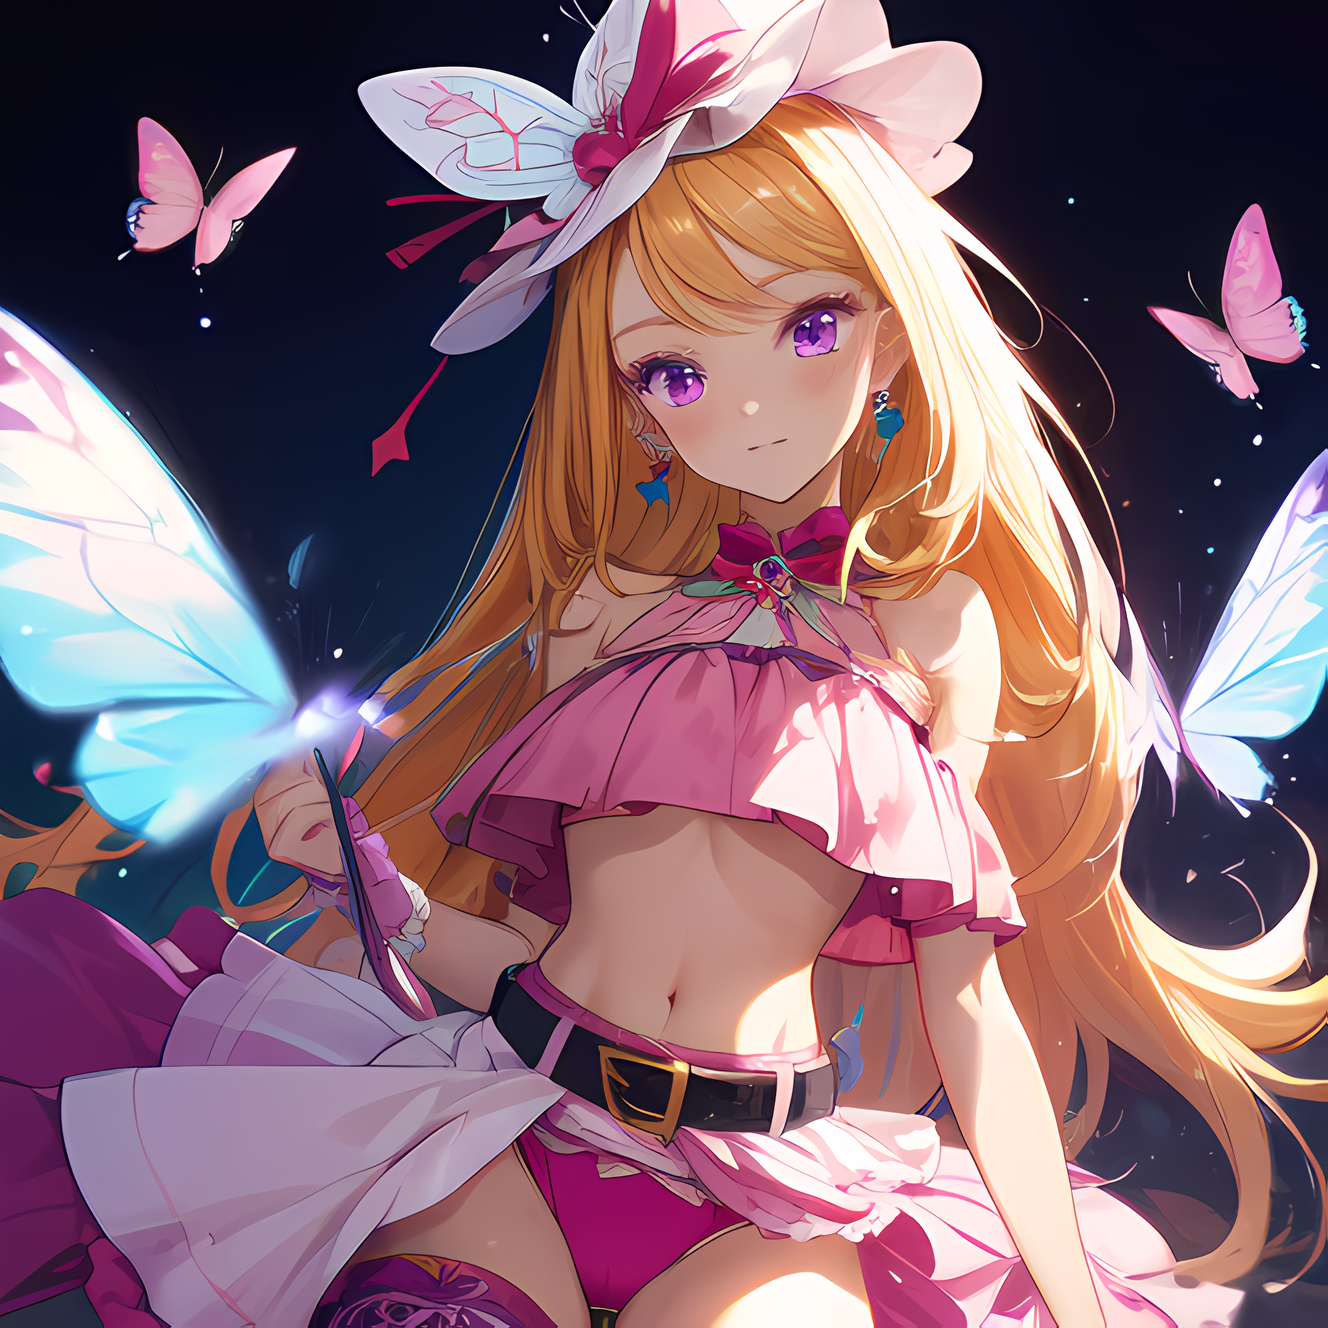 AI Art: キュアバタフライ（Cure Butterfly）（プリキュア